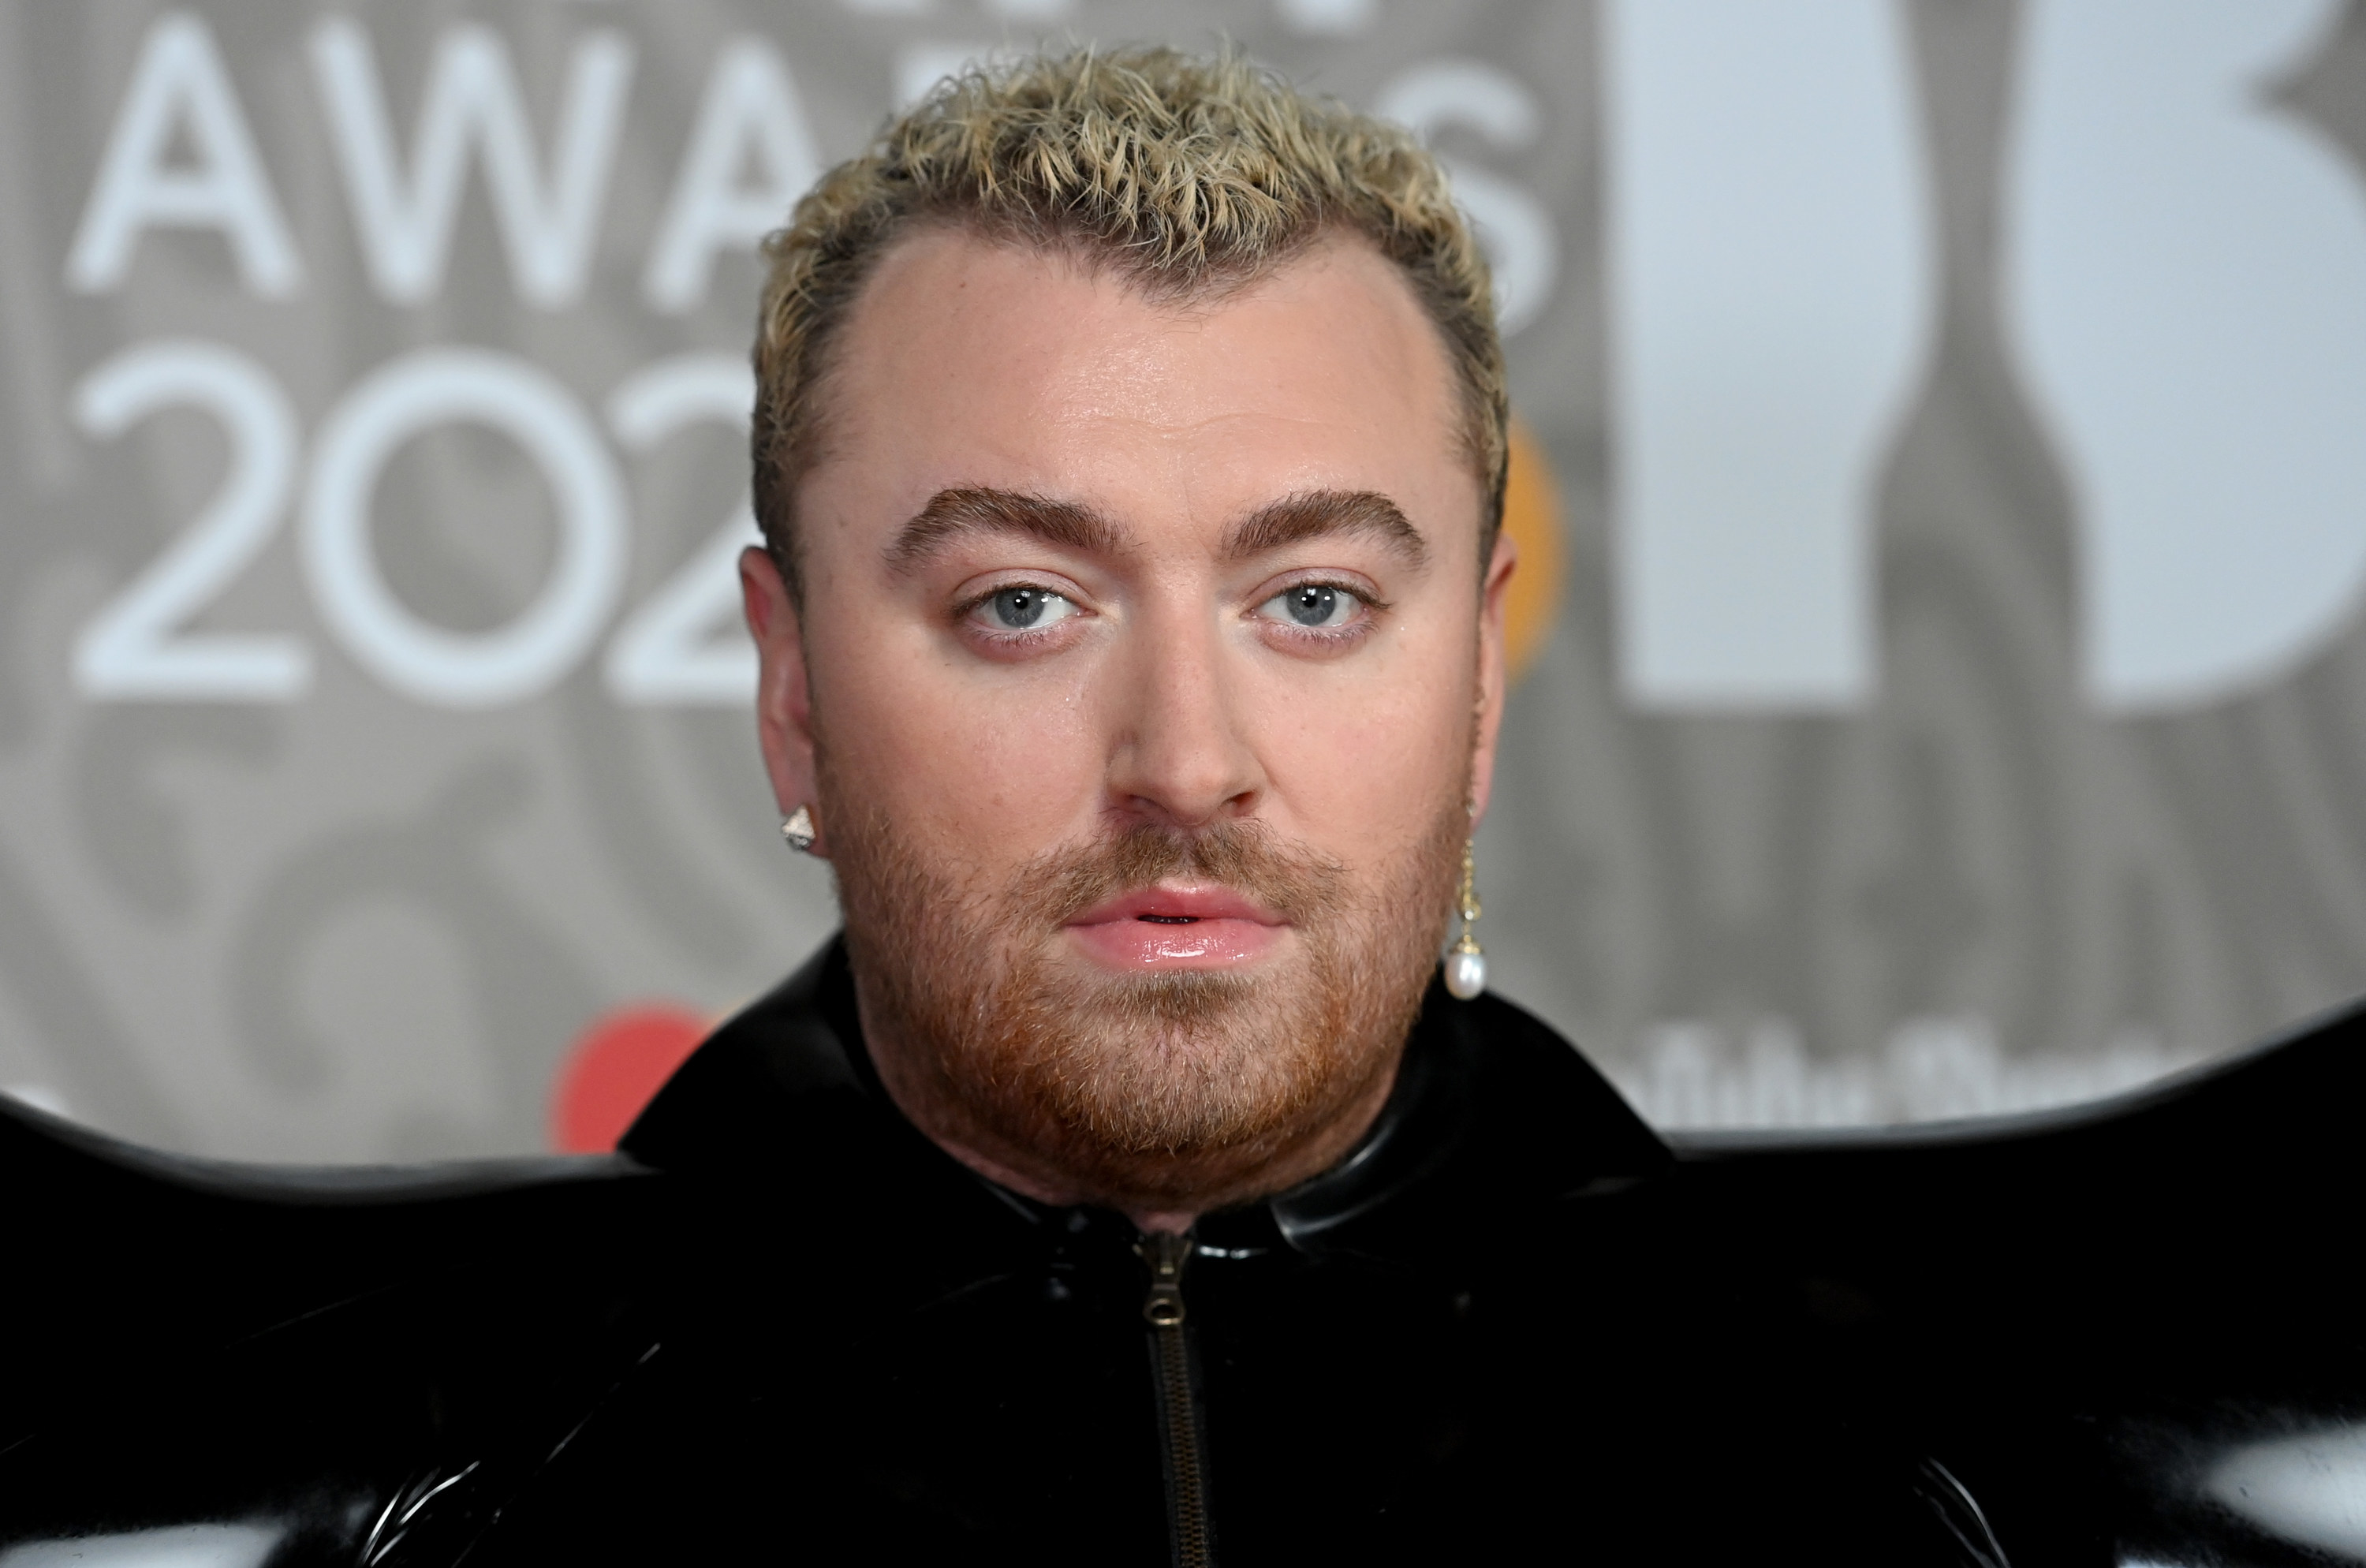 Sam Smith posing on a red carpet